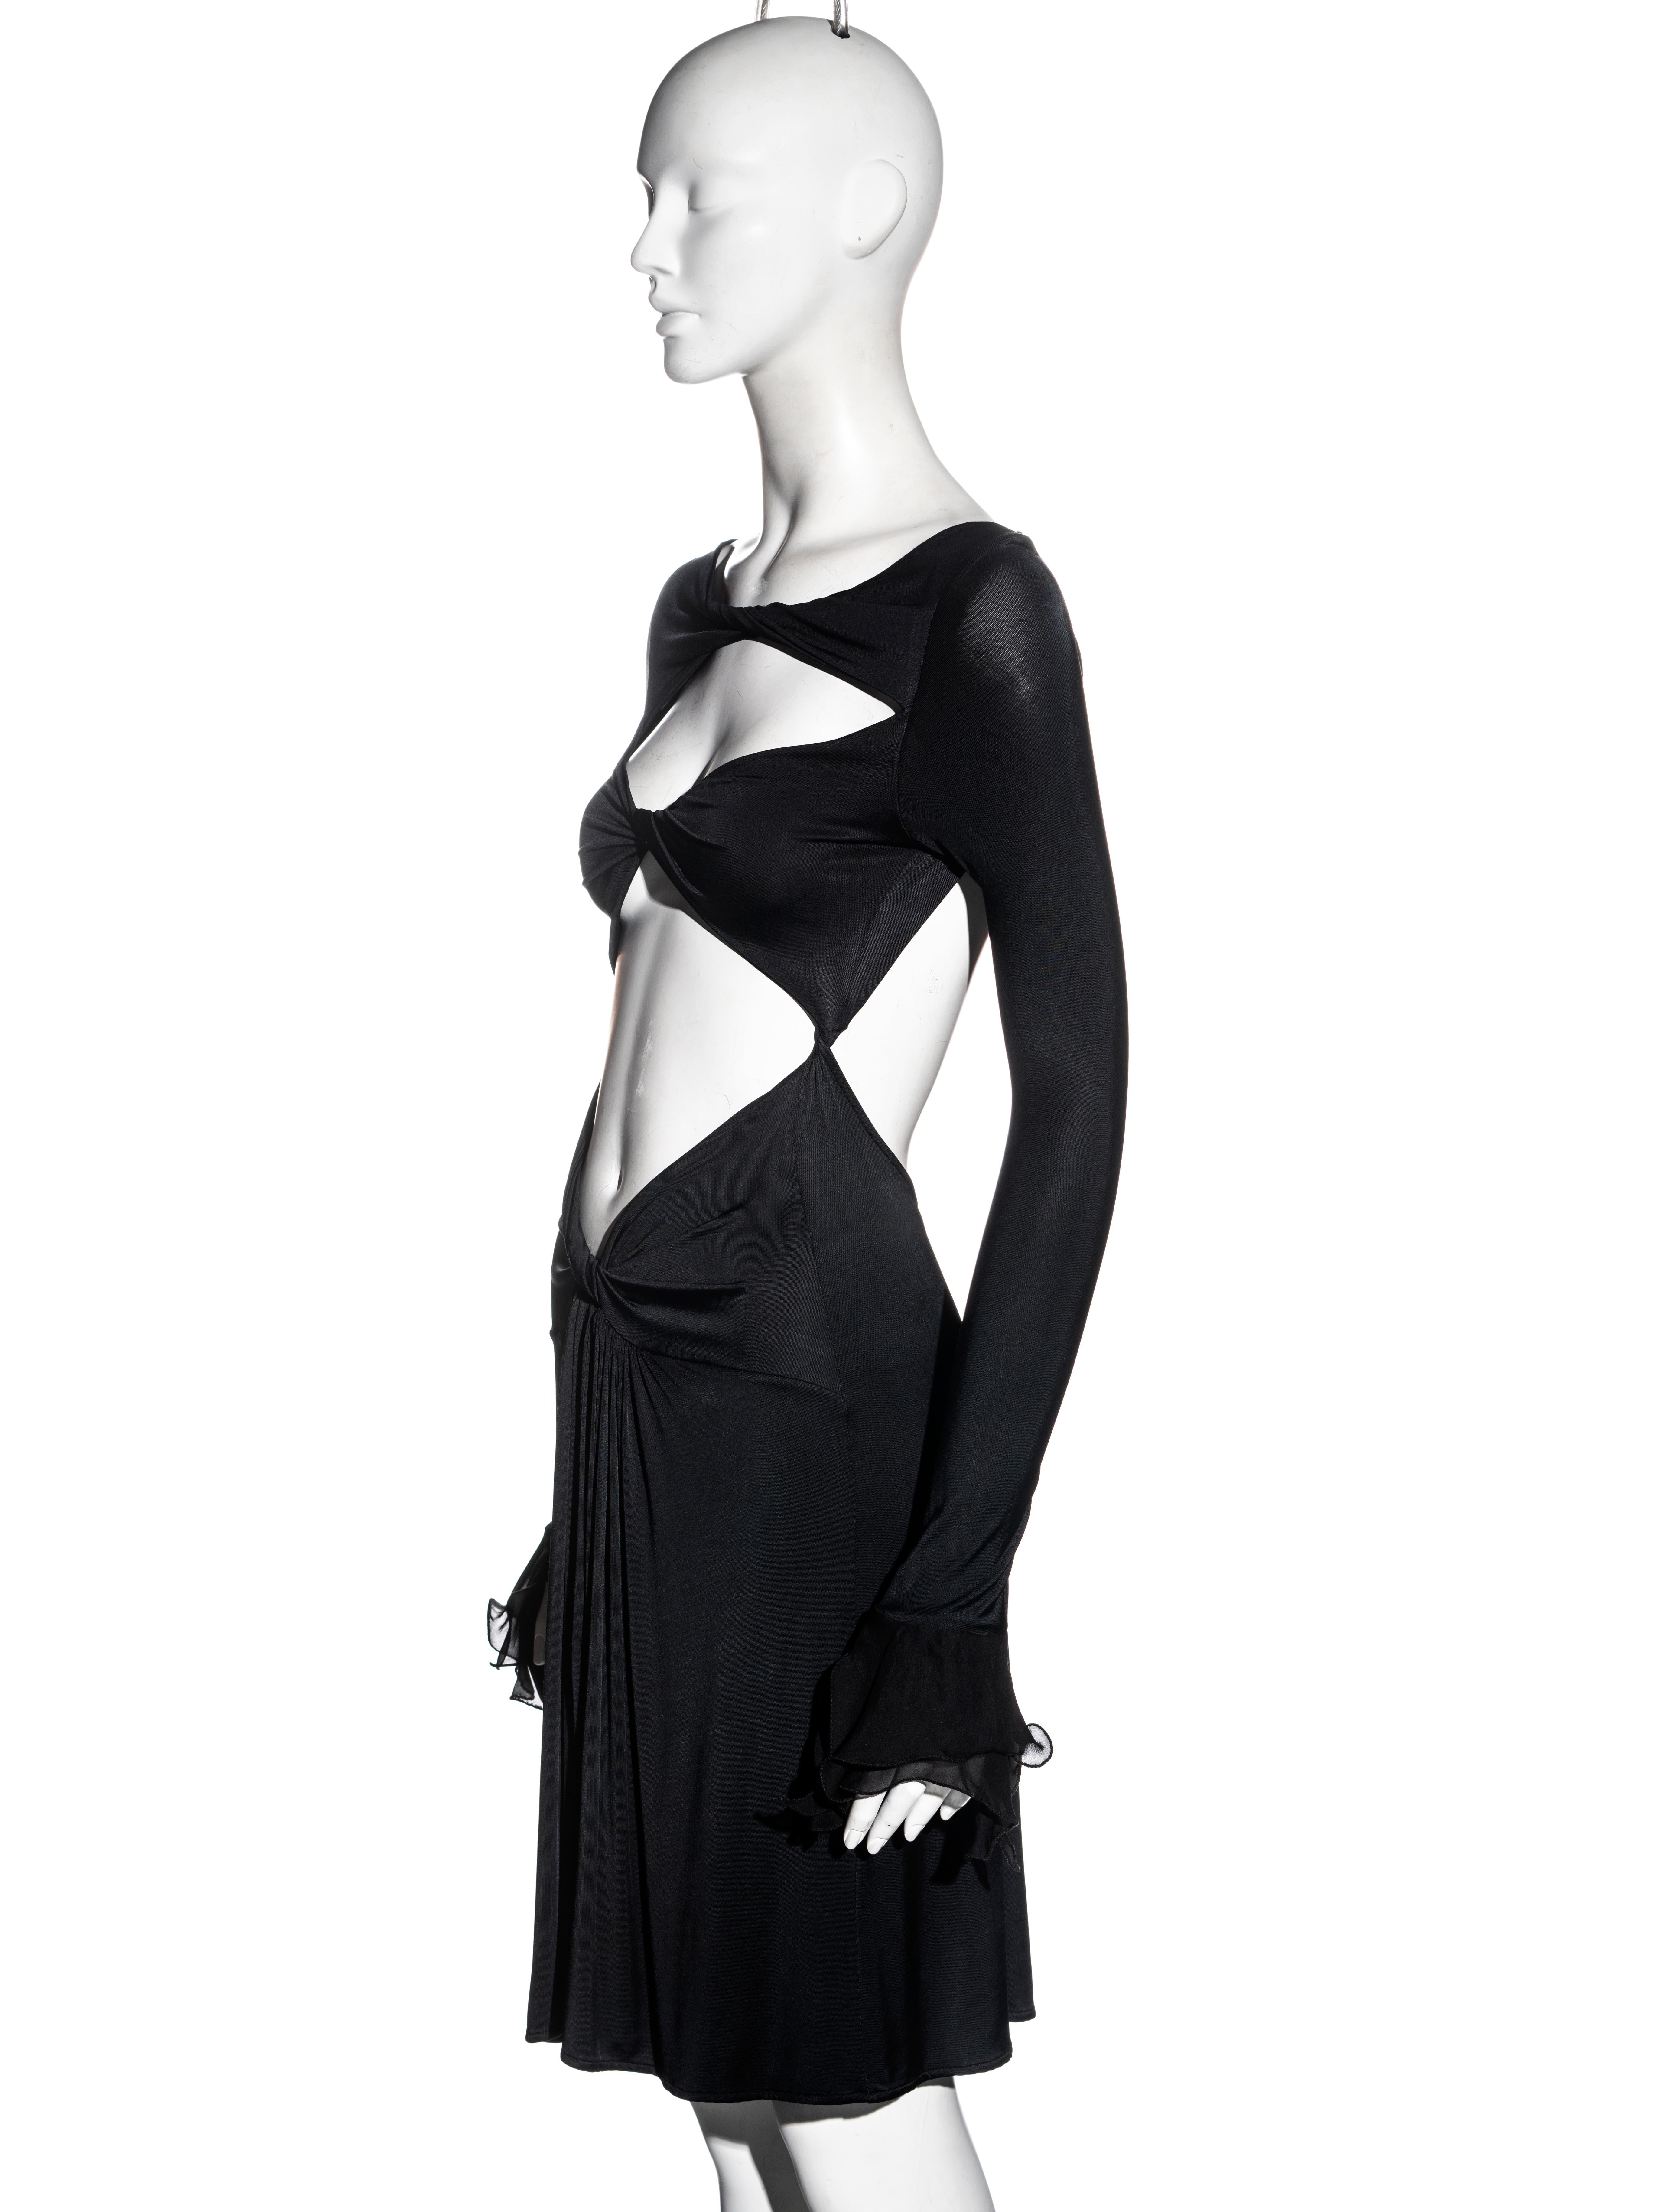 Women's Roberto Cavalli black viscose dress with cut-outs, ss 2006